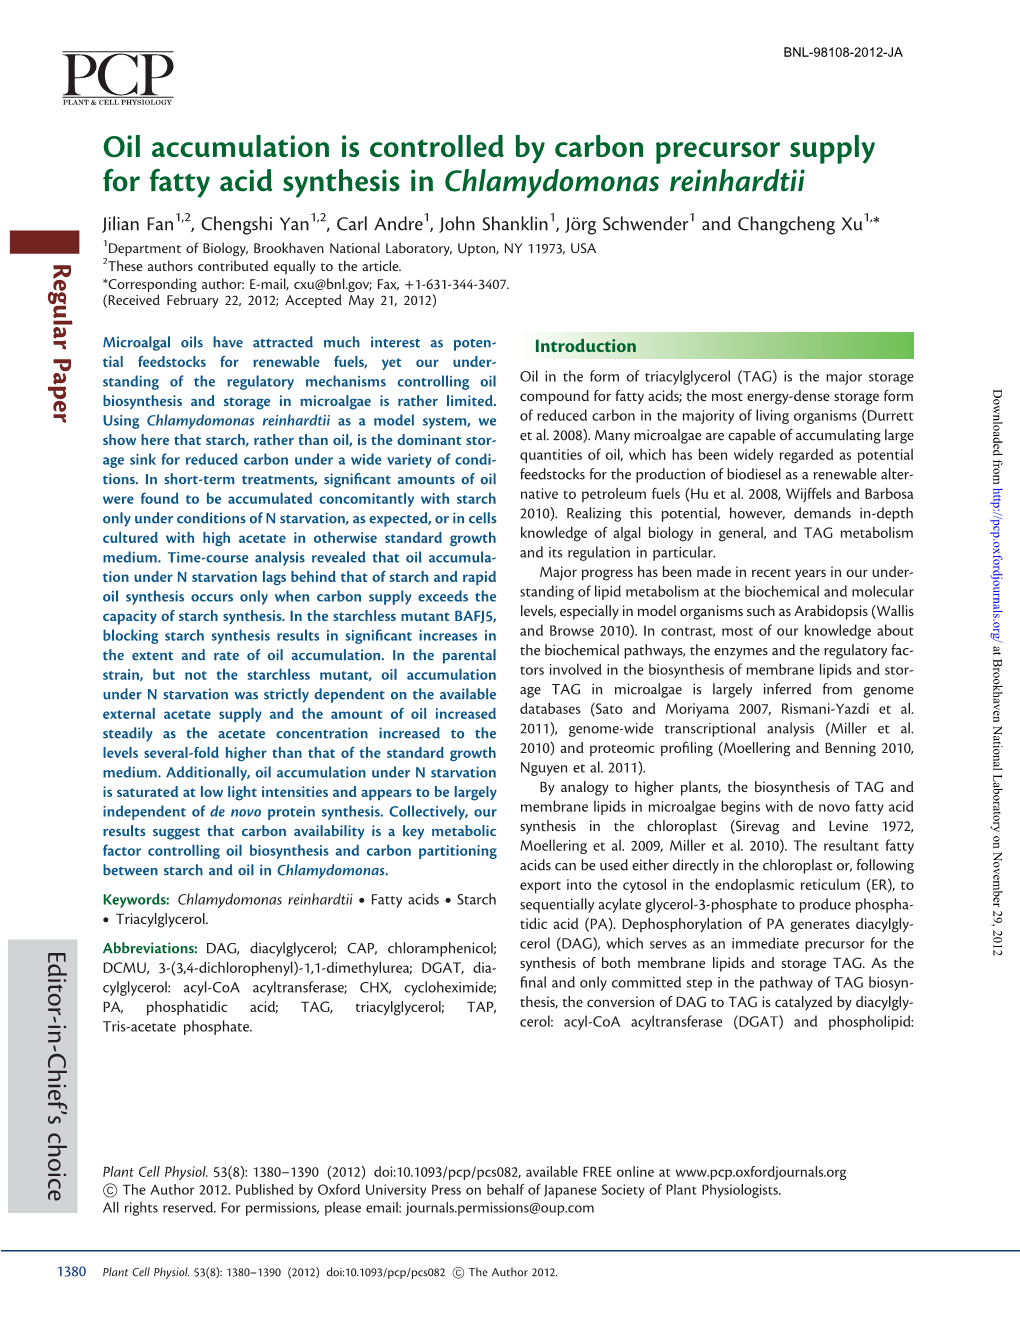 Oil Accumulation Is Controlled by Carbon Precursor Supply for Fatty